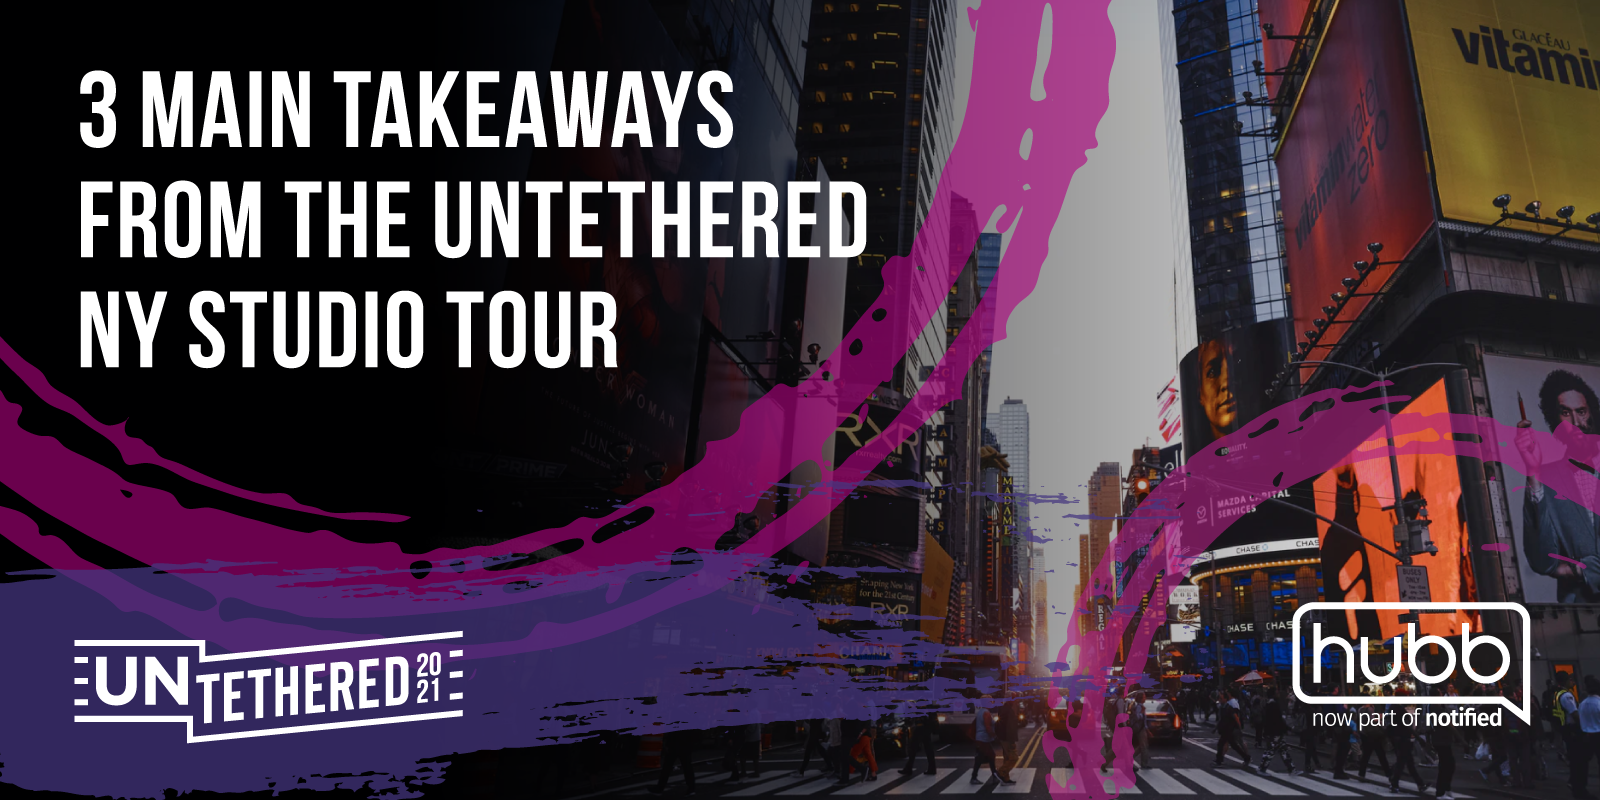 Three Lessons from the UNTETHERED NY Studio Tour